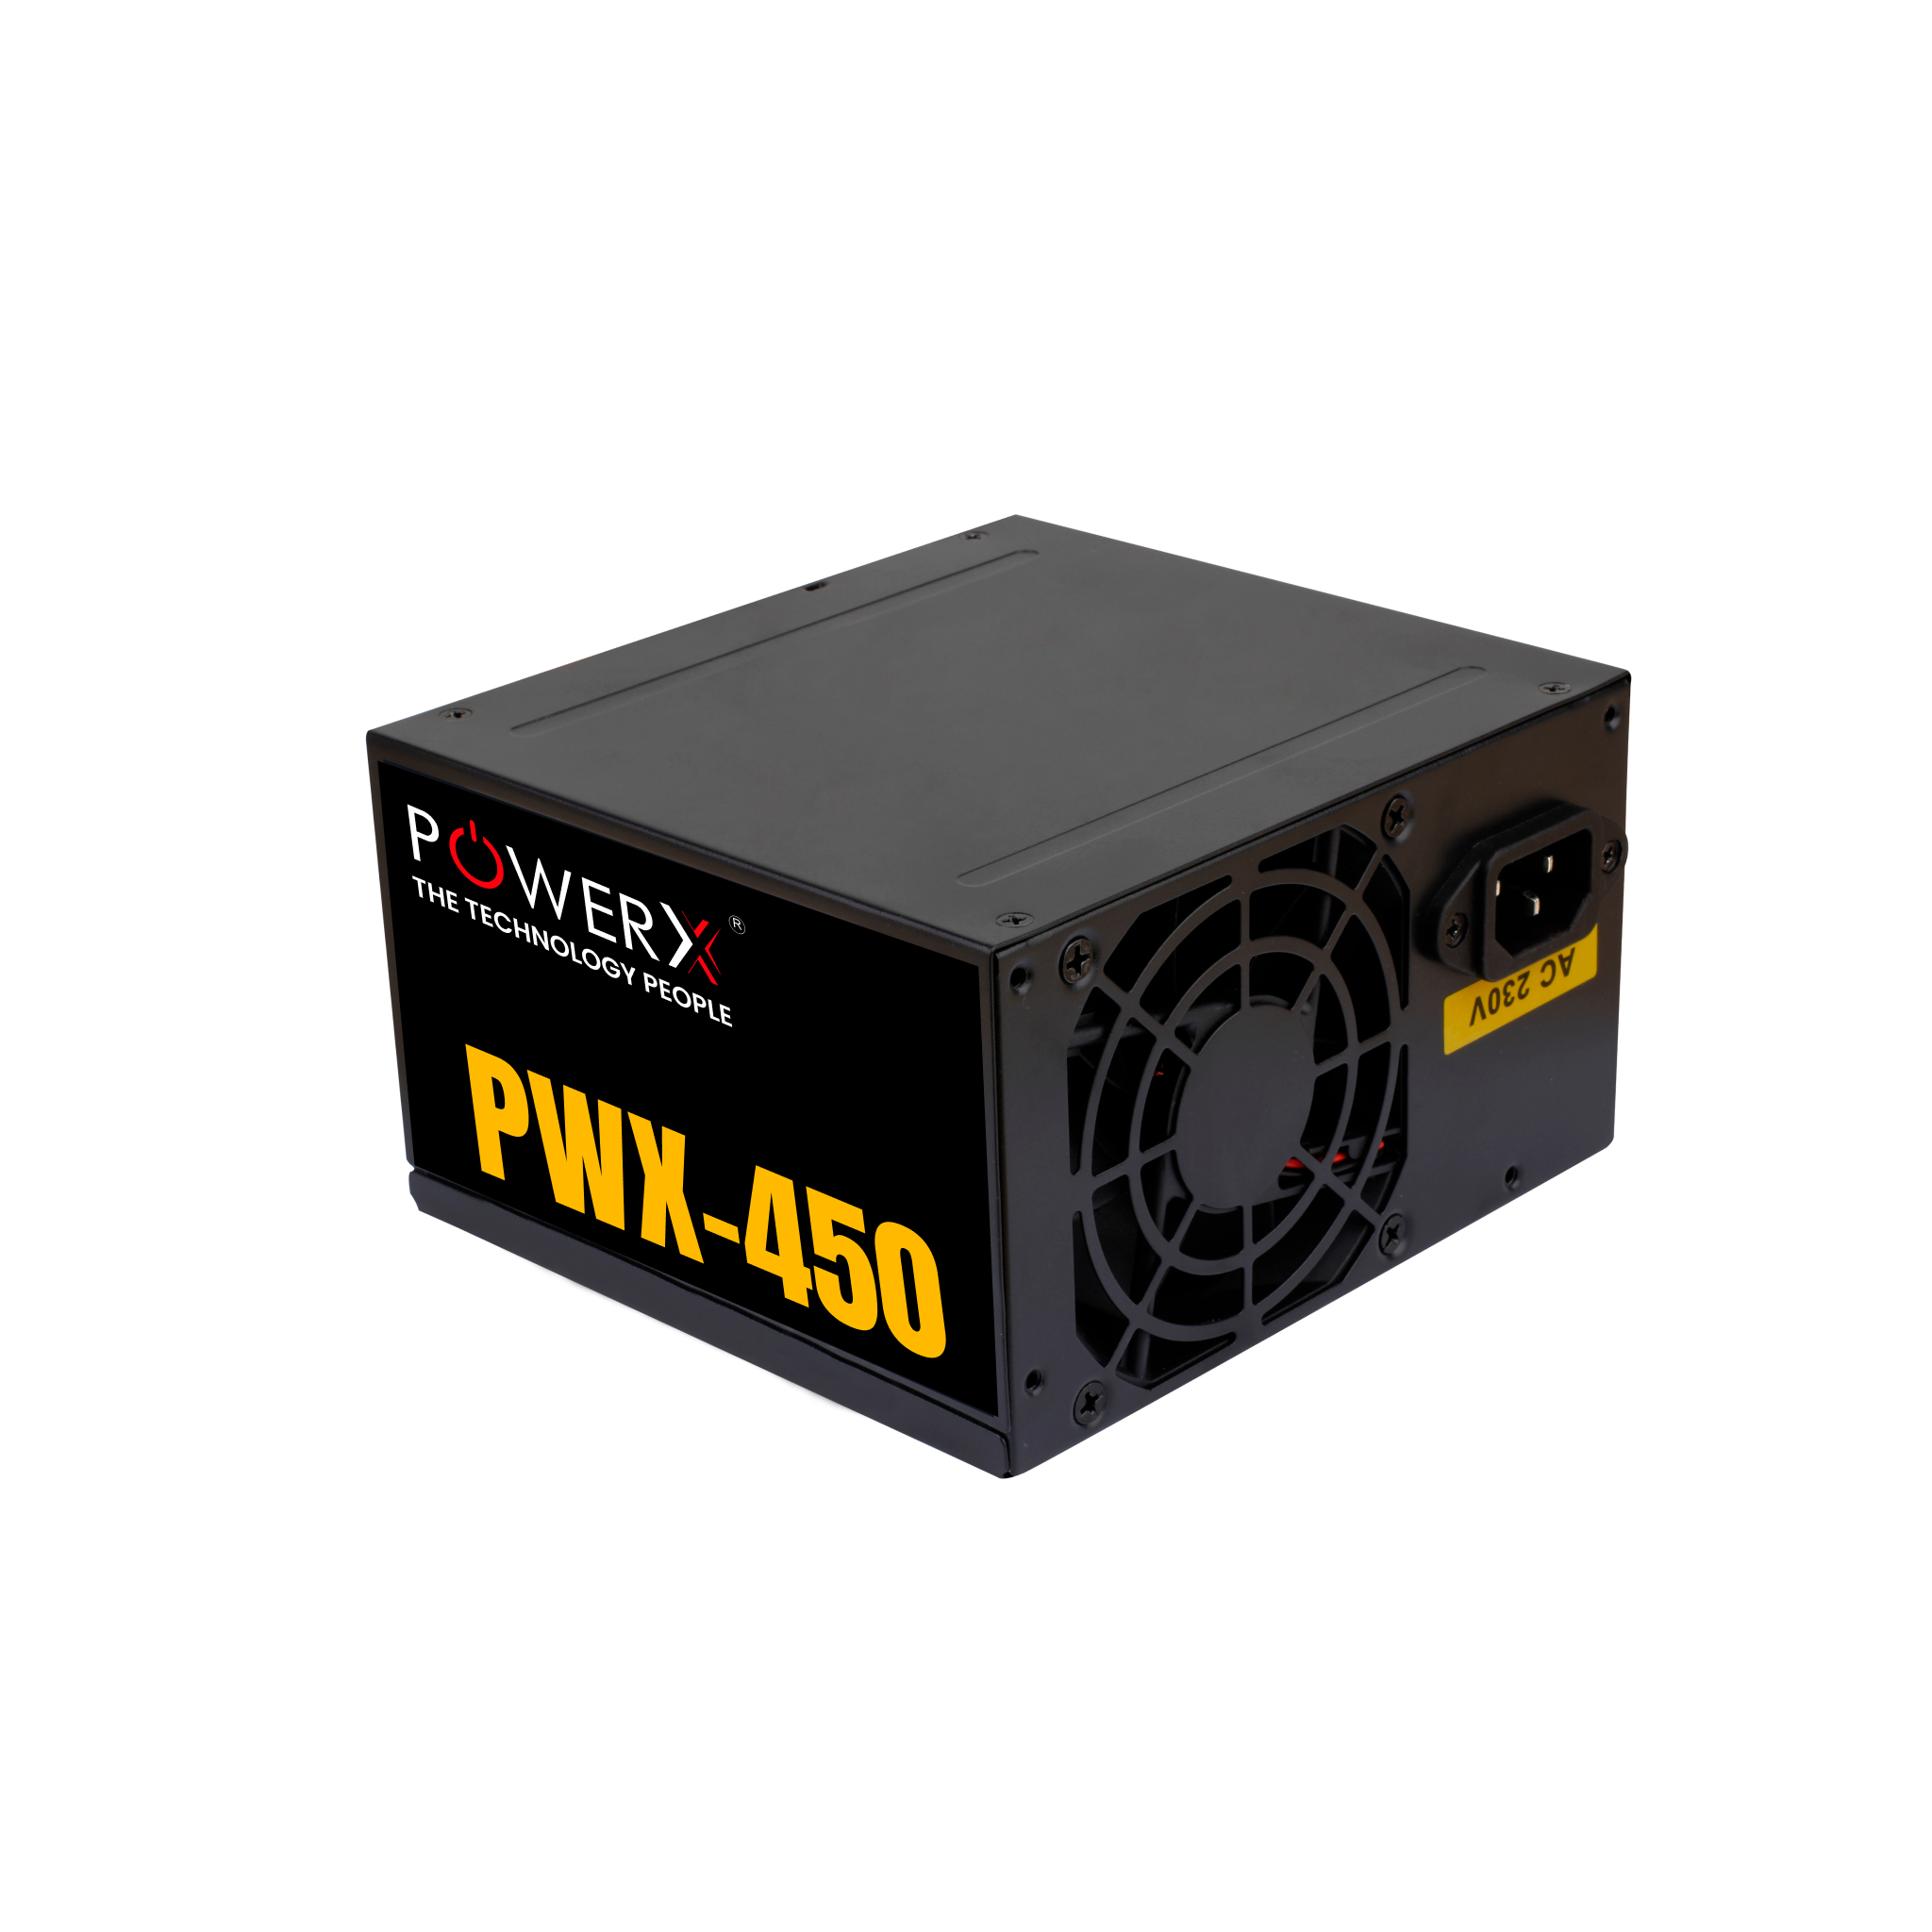 PWX-450 SMD SMPS